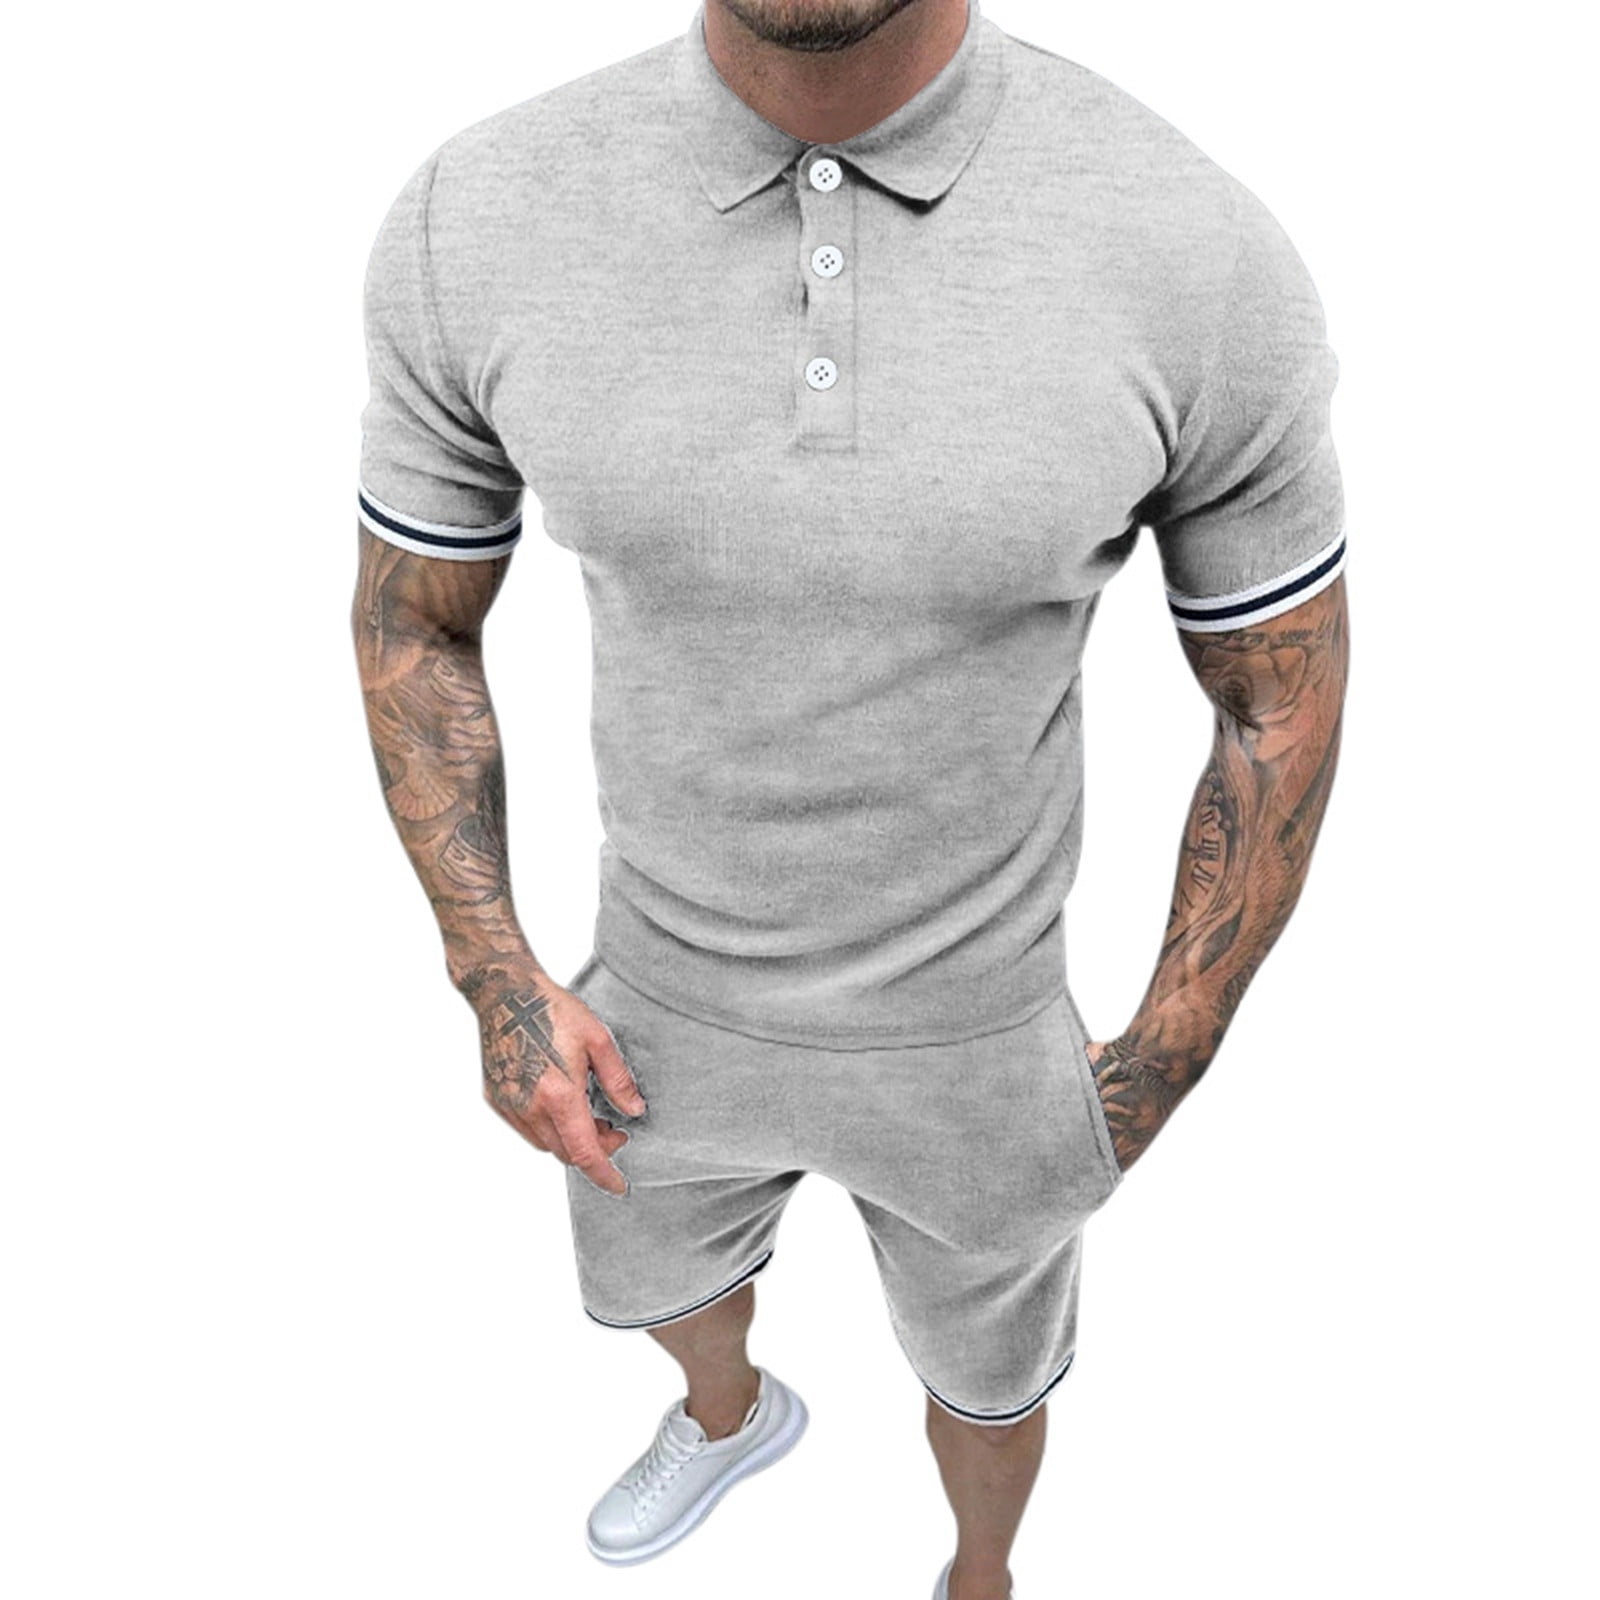 kpoplk Mens Short Sleeve Casual Polo Shirt and Shorts Sets Two Piece ...